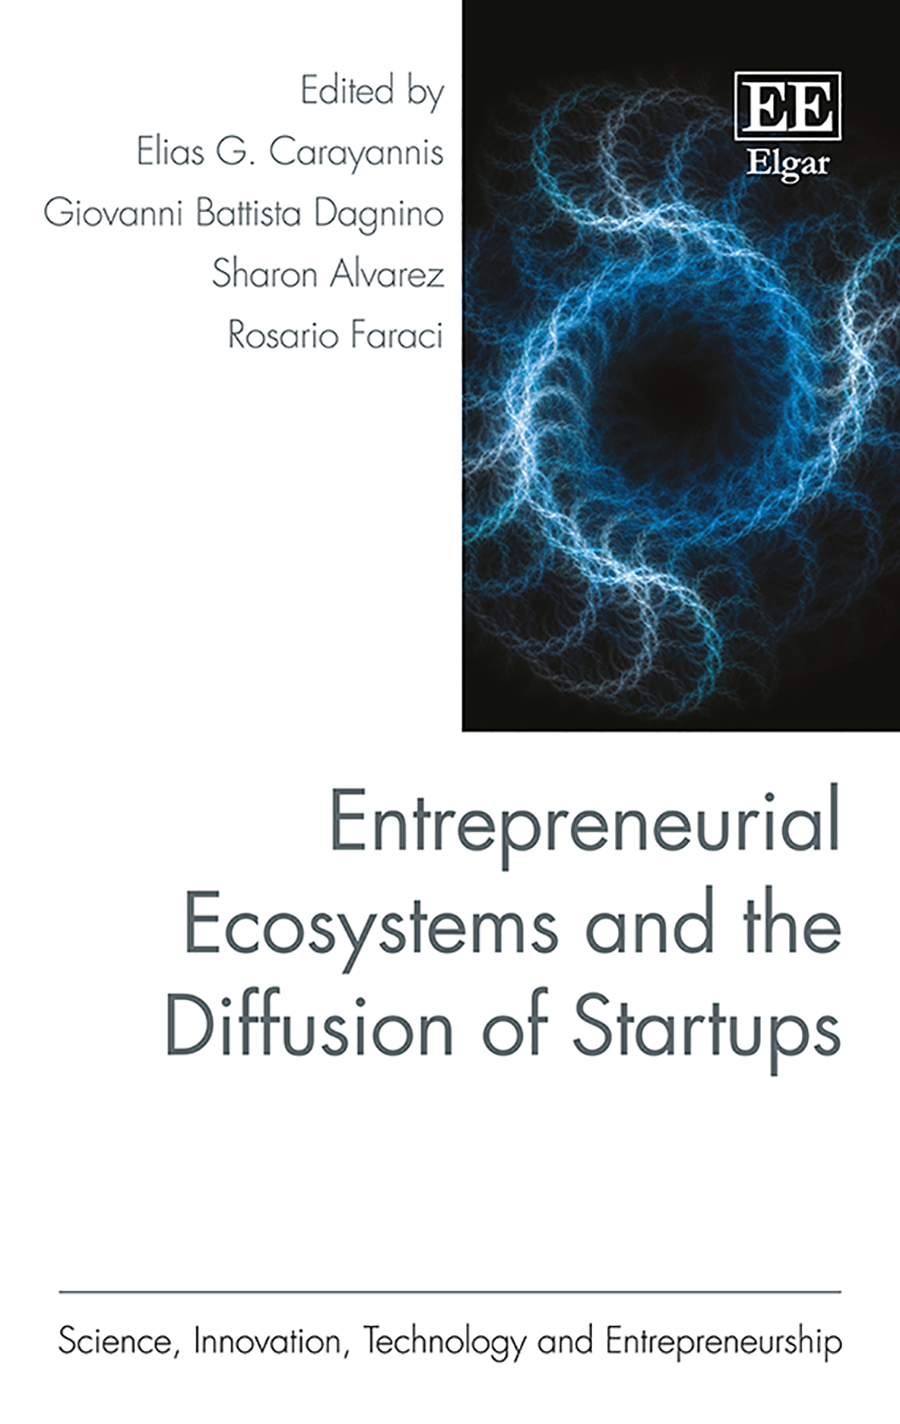 Entrepreneurial Ecosystems and the Diffusion of Startups